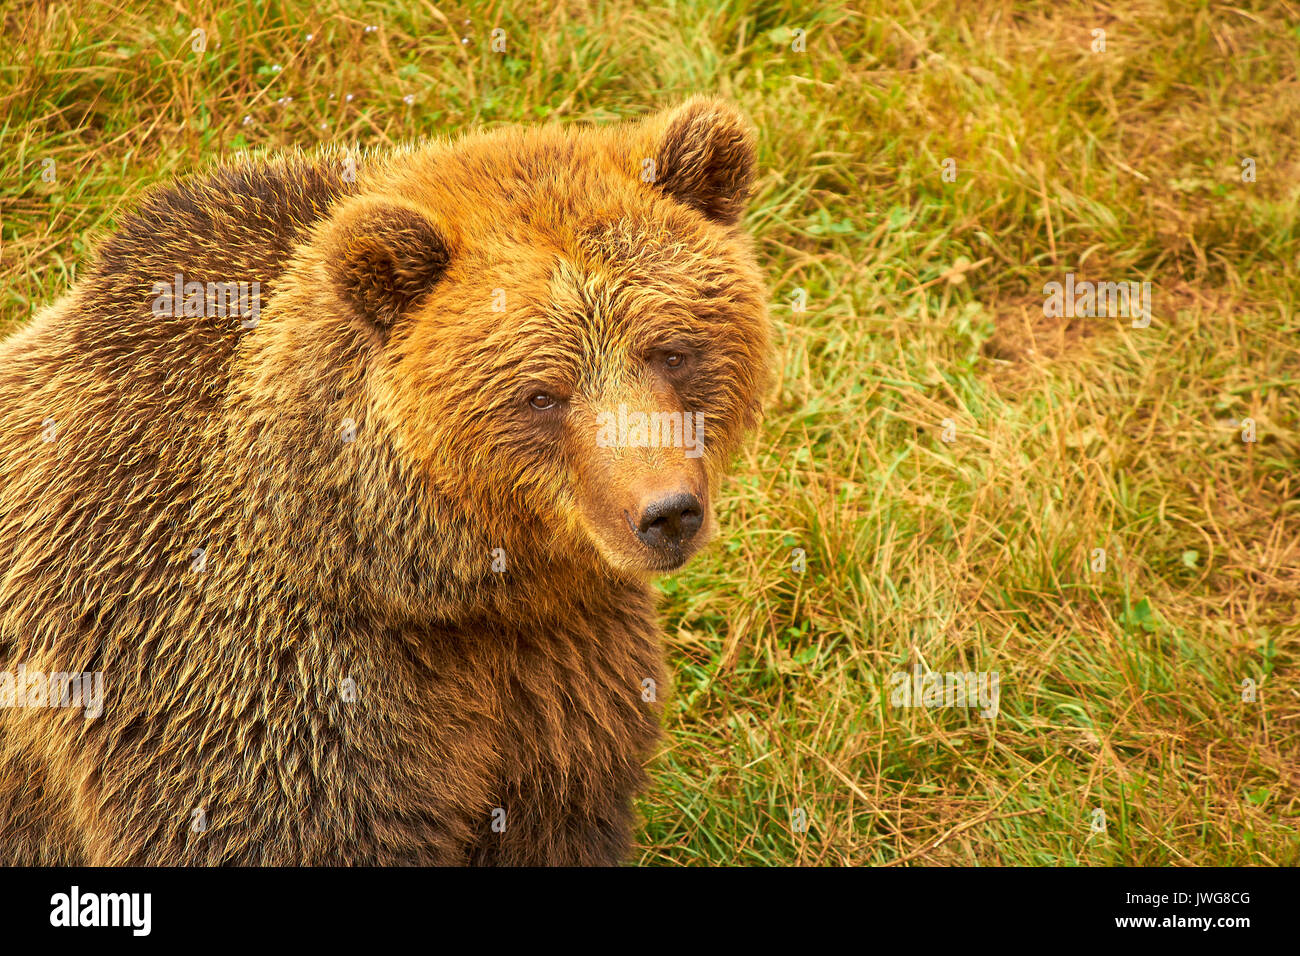 Spanish bear seating and looking up Stock Photo